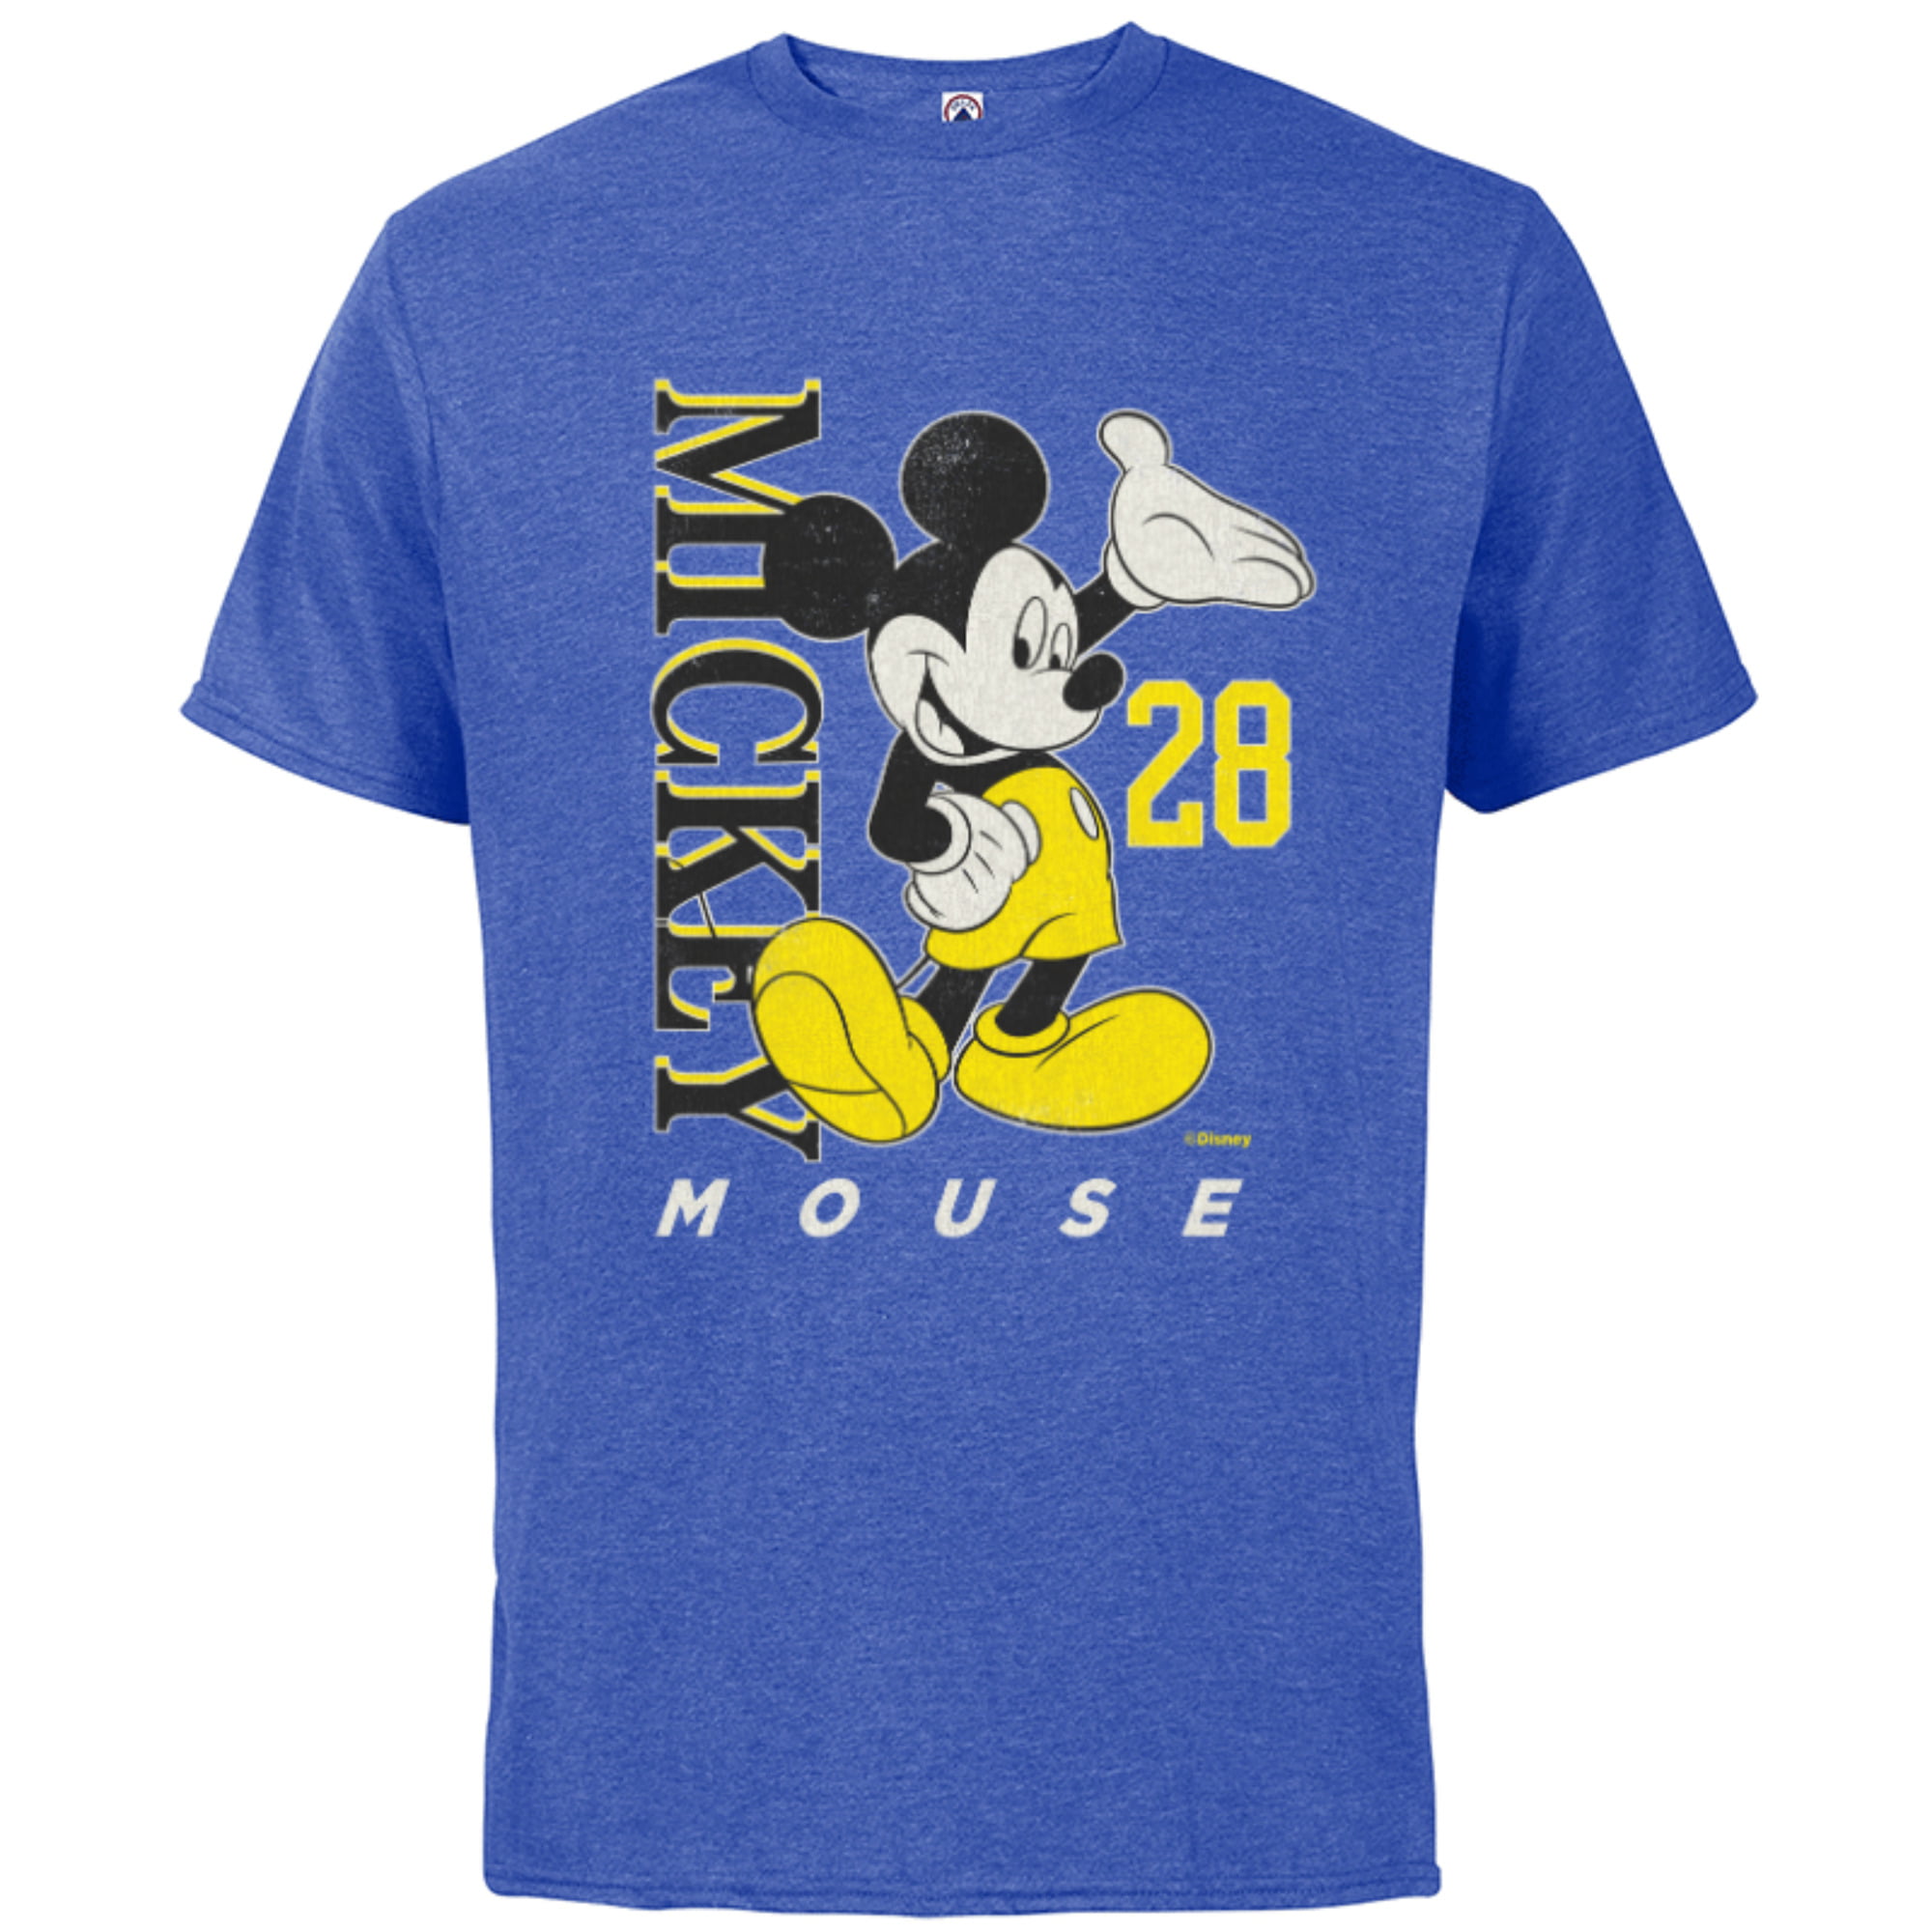 Short Mouse Classics Cotton for - Mickey Yellow - 28 Sleeve Adults & Vintage Disney T-Shirt Customized-Black Black